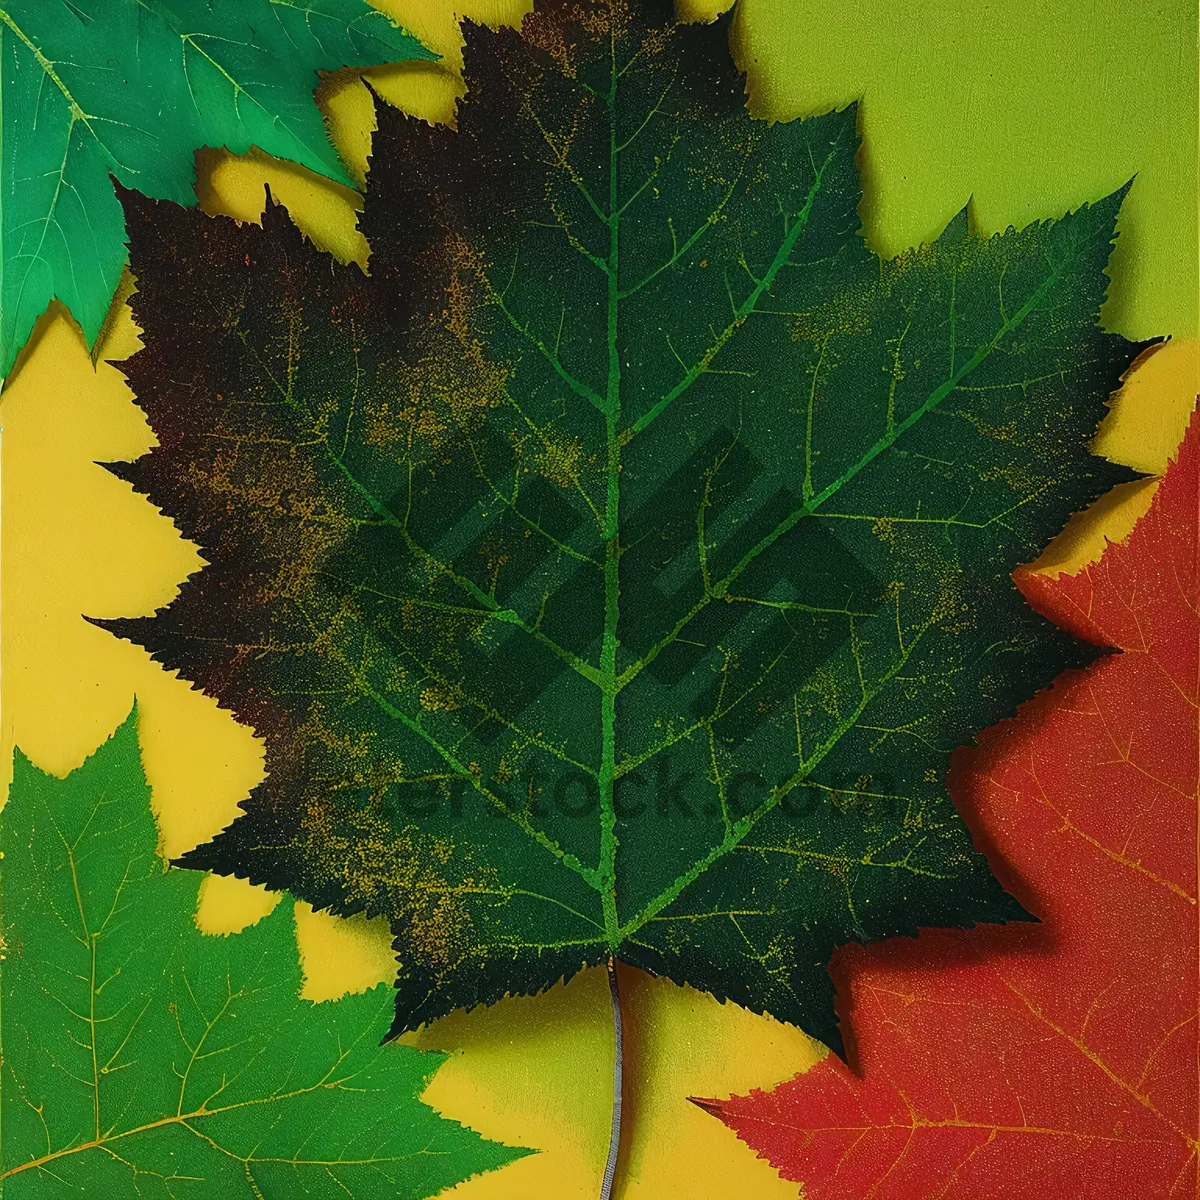 Picture of Vibrant Maple Leaf in Autumn's Glow